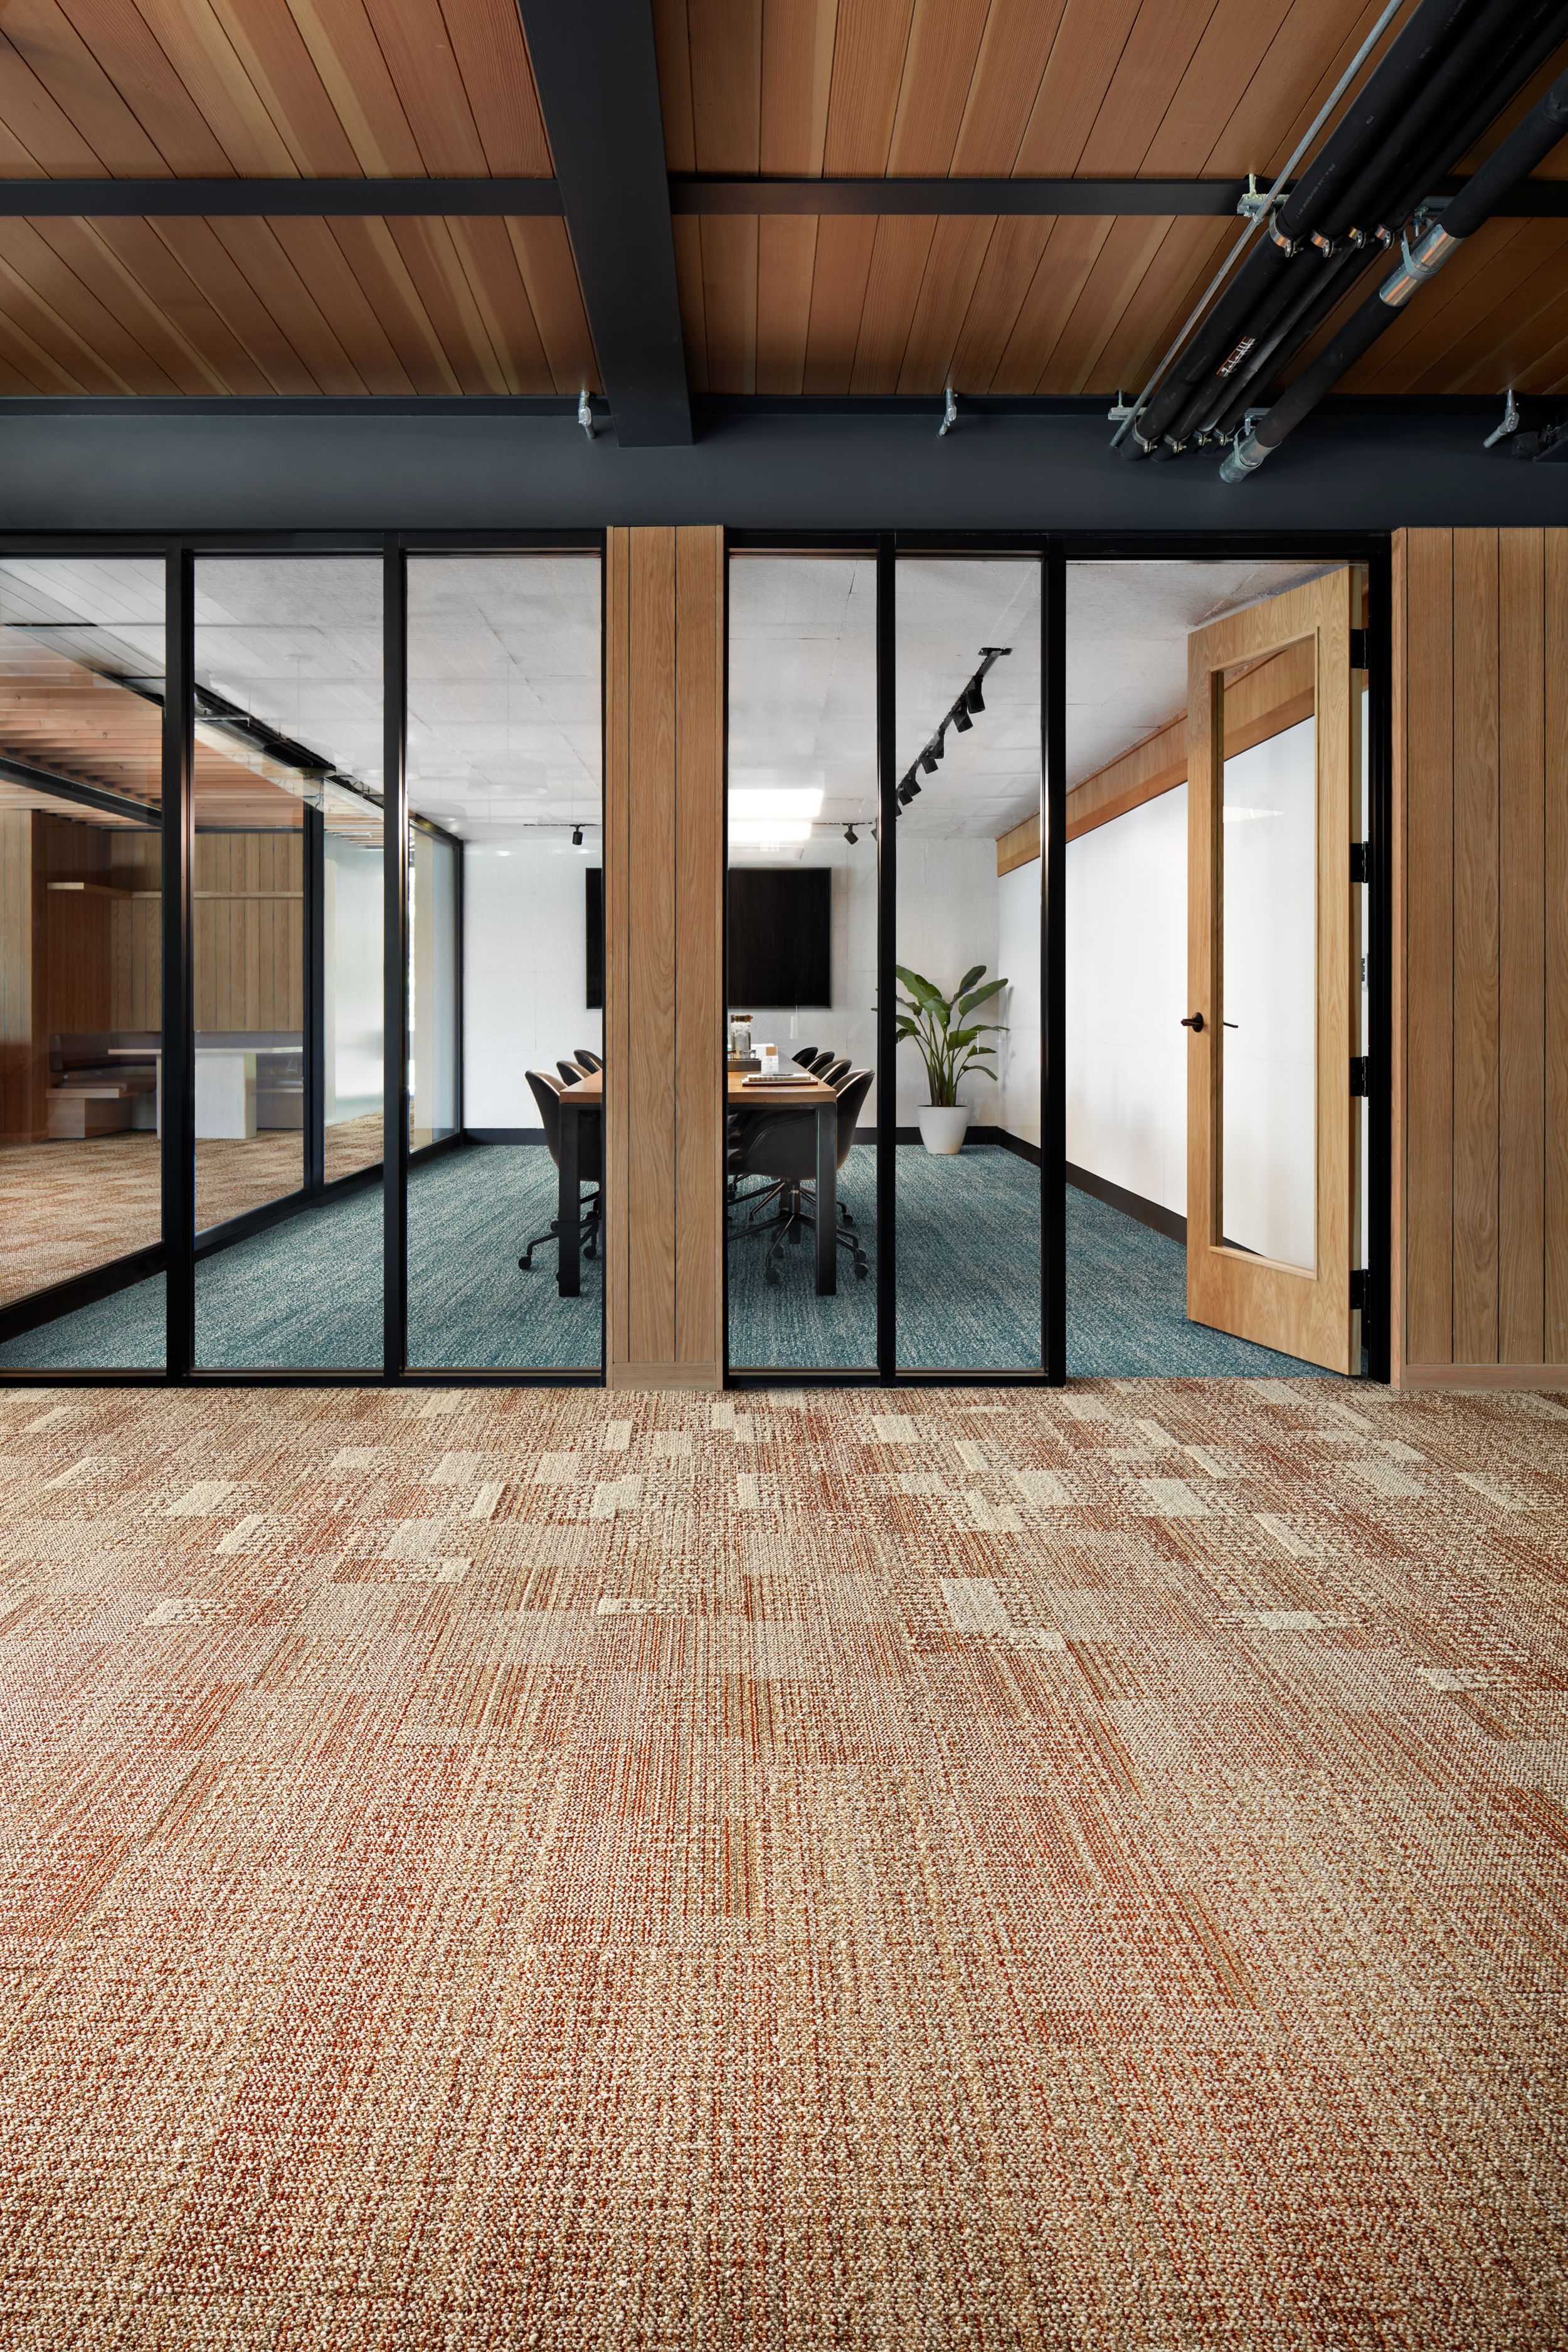 Interface Dot 2 Dot, Dot O-Mine and Diddley Dot plank carpet tile in meeting room image number 4